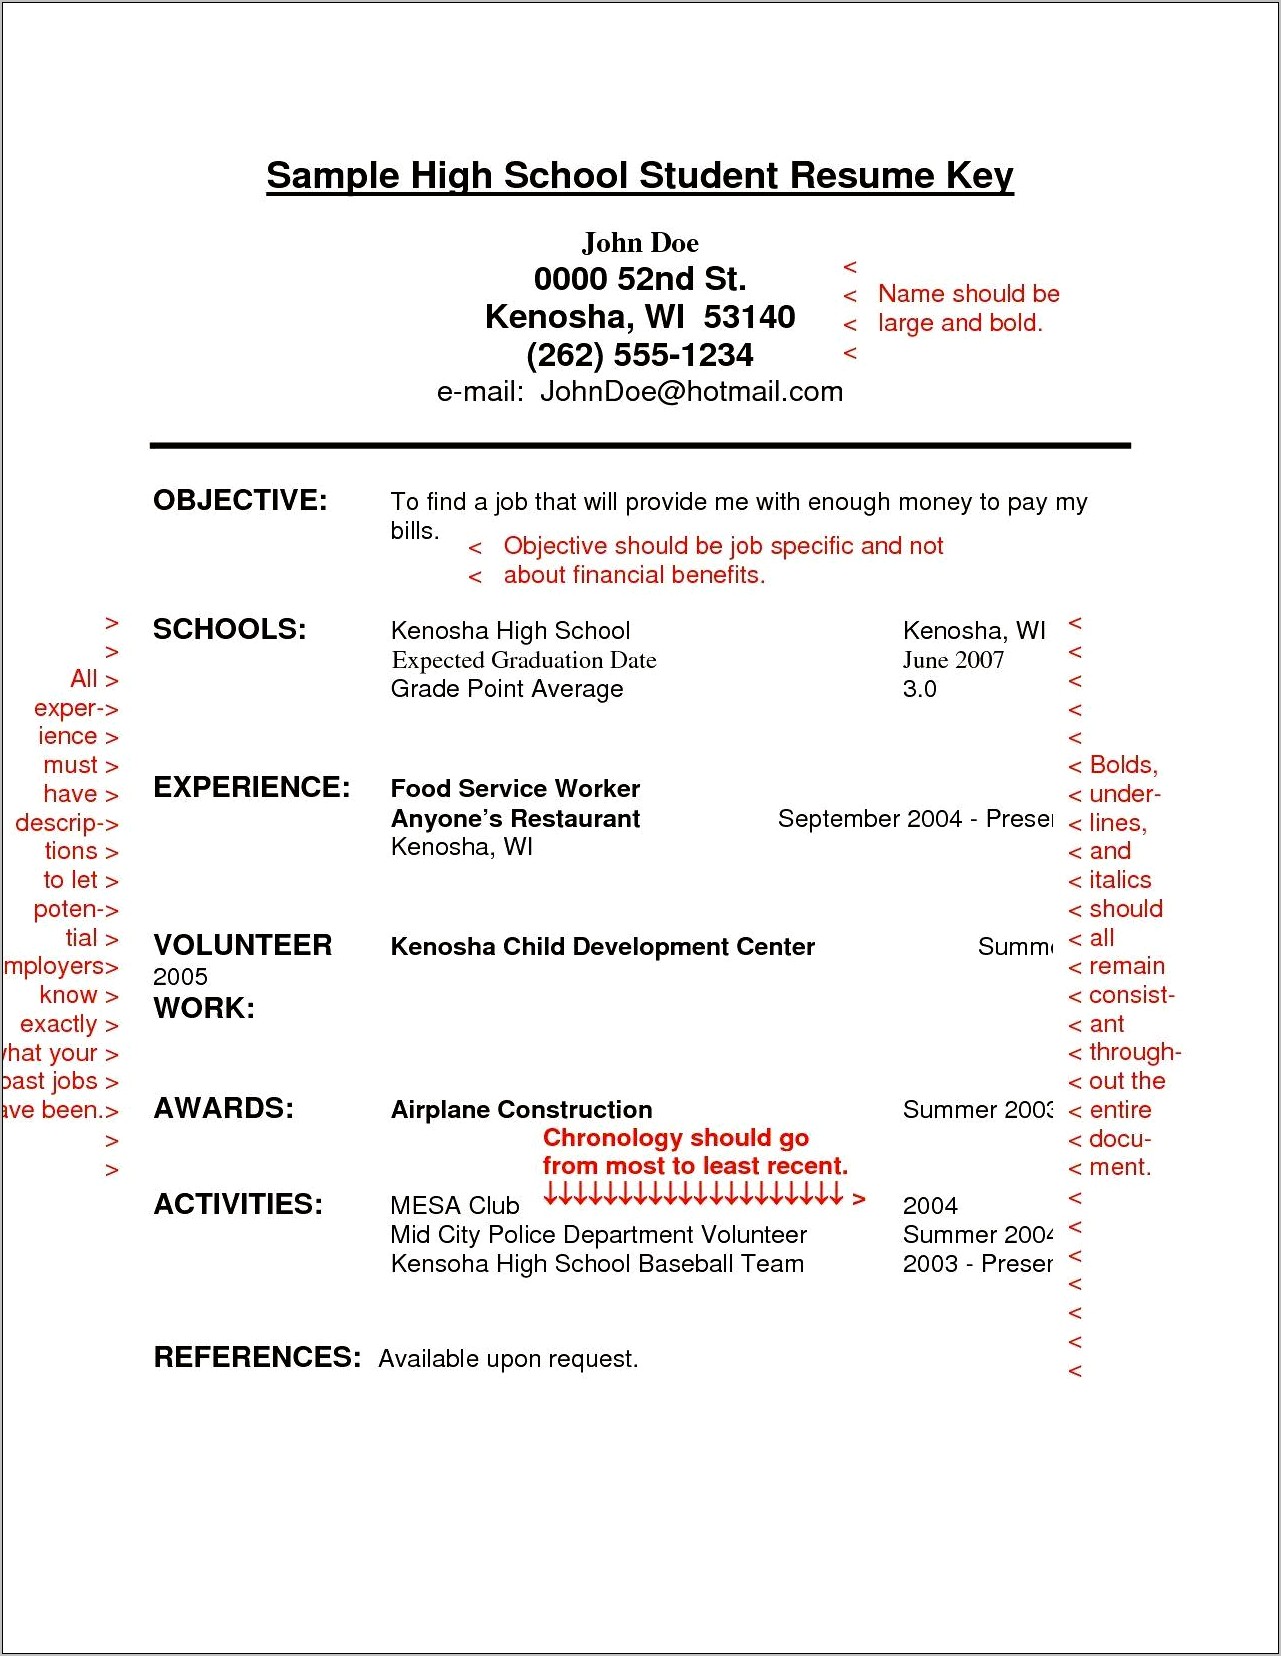 Resume Objective Statement Examples For Highschool Students